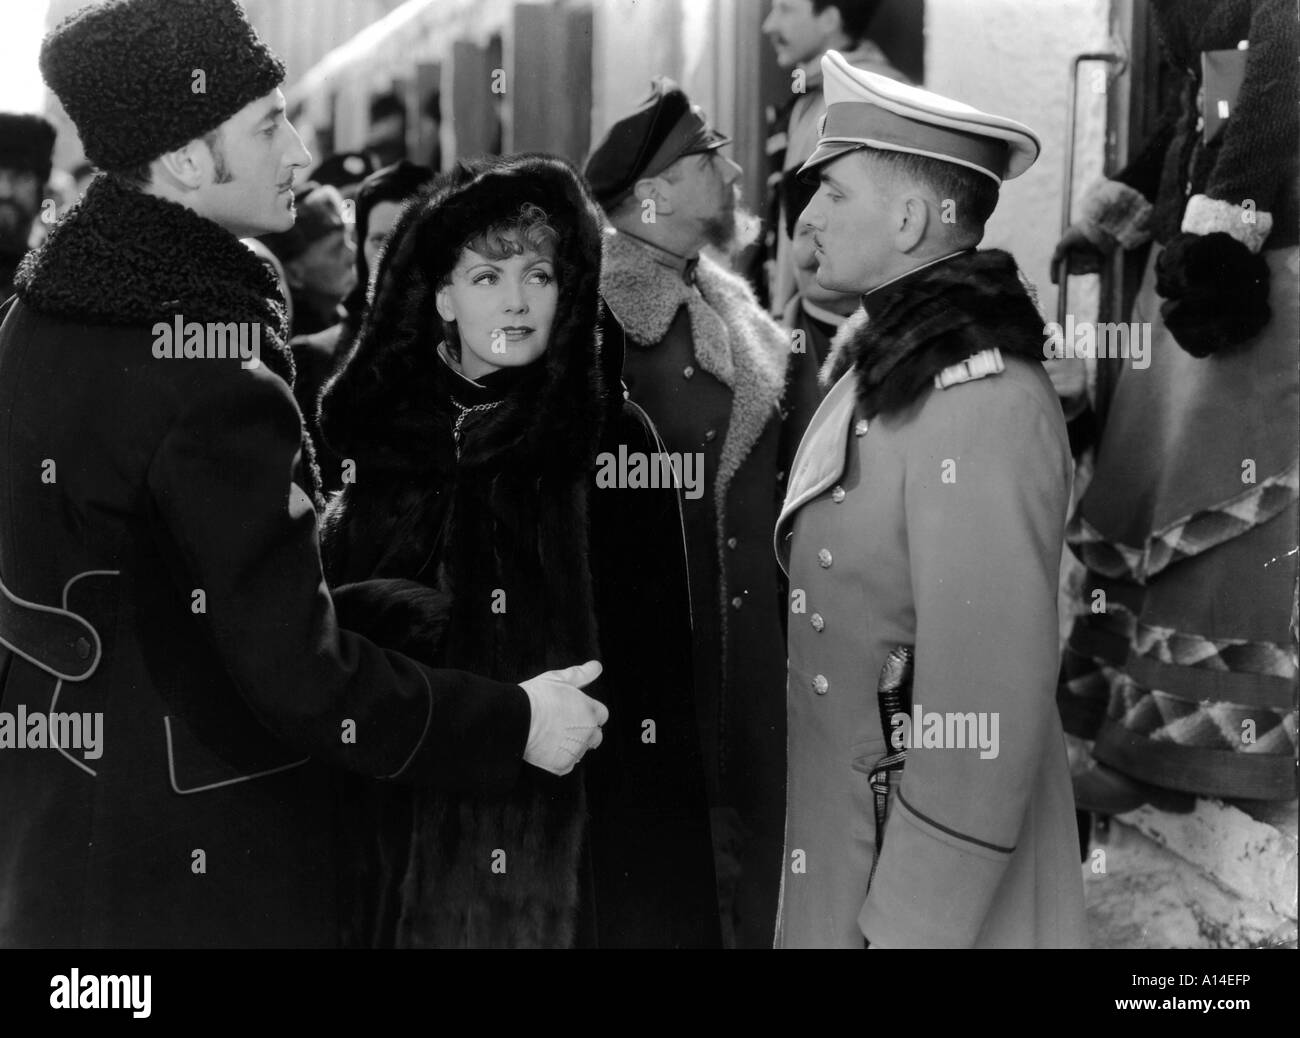 Anna Karenina Year 1935 Director Clarence Brown Greta Garbo Fredric March Basil Rathbone Based on the book by Leo Tolstoy Stock Photo